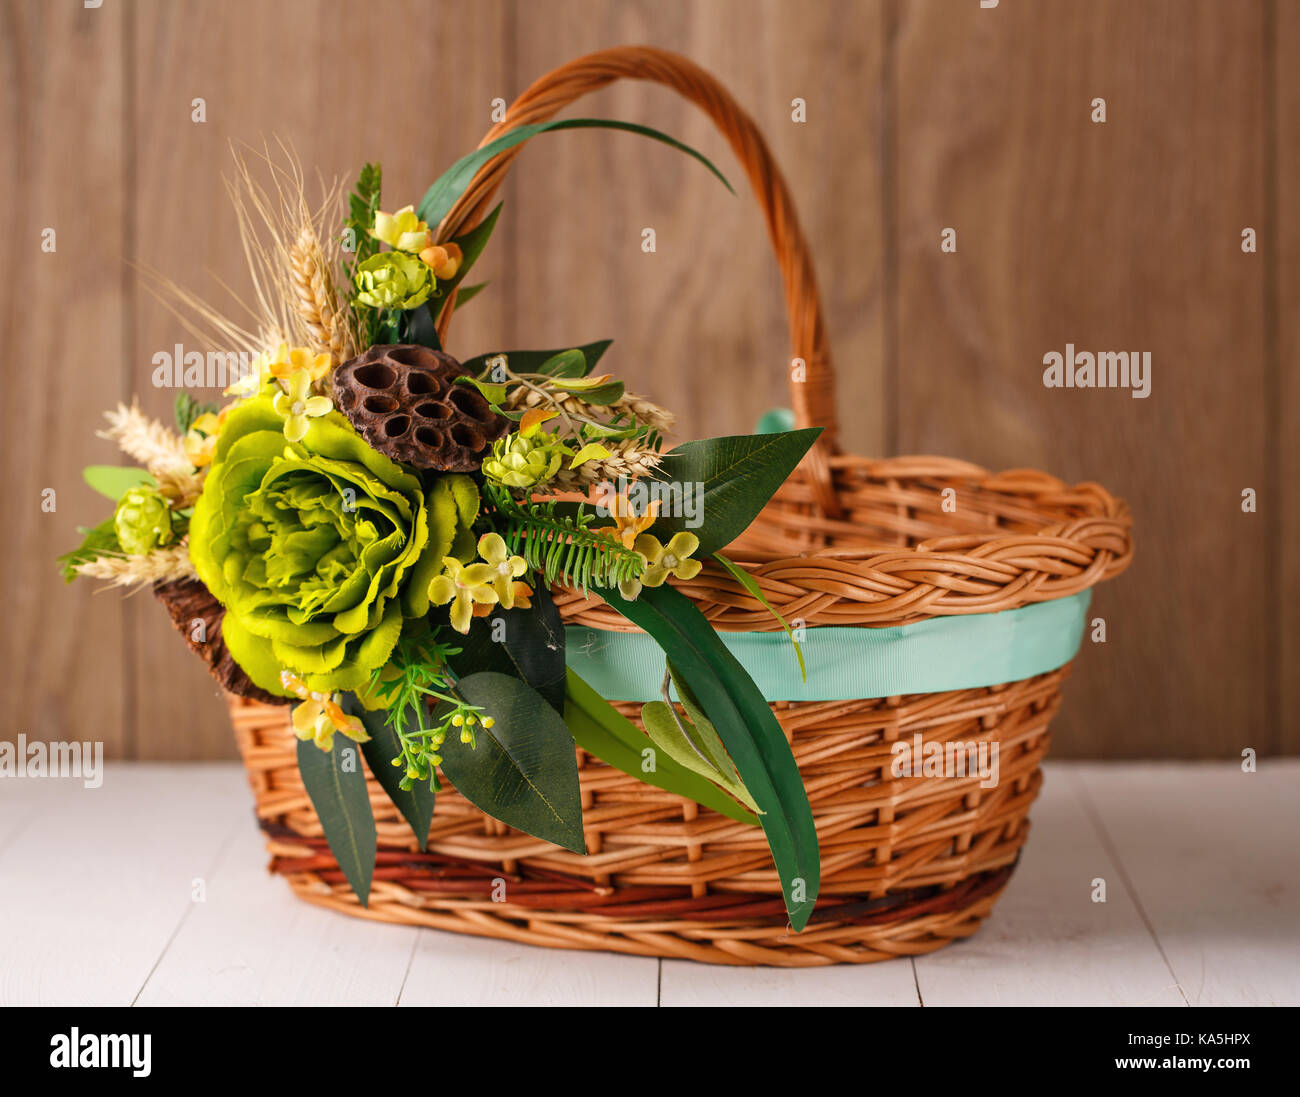 Decorated Easter basket Stock Photo